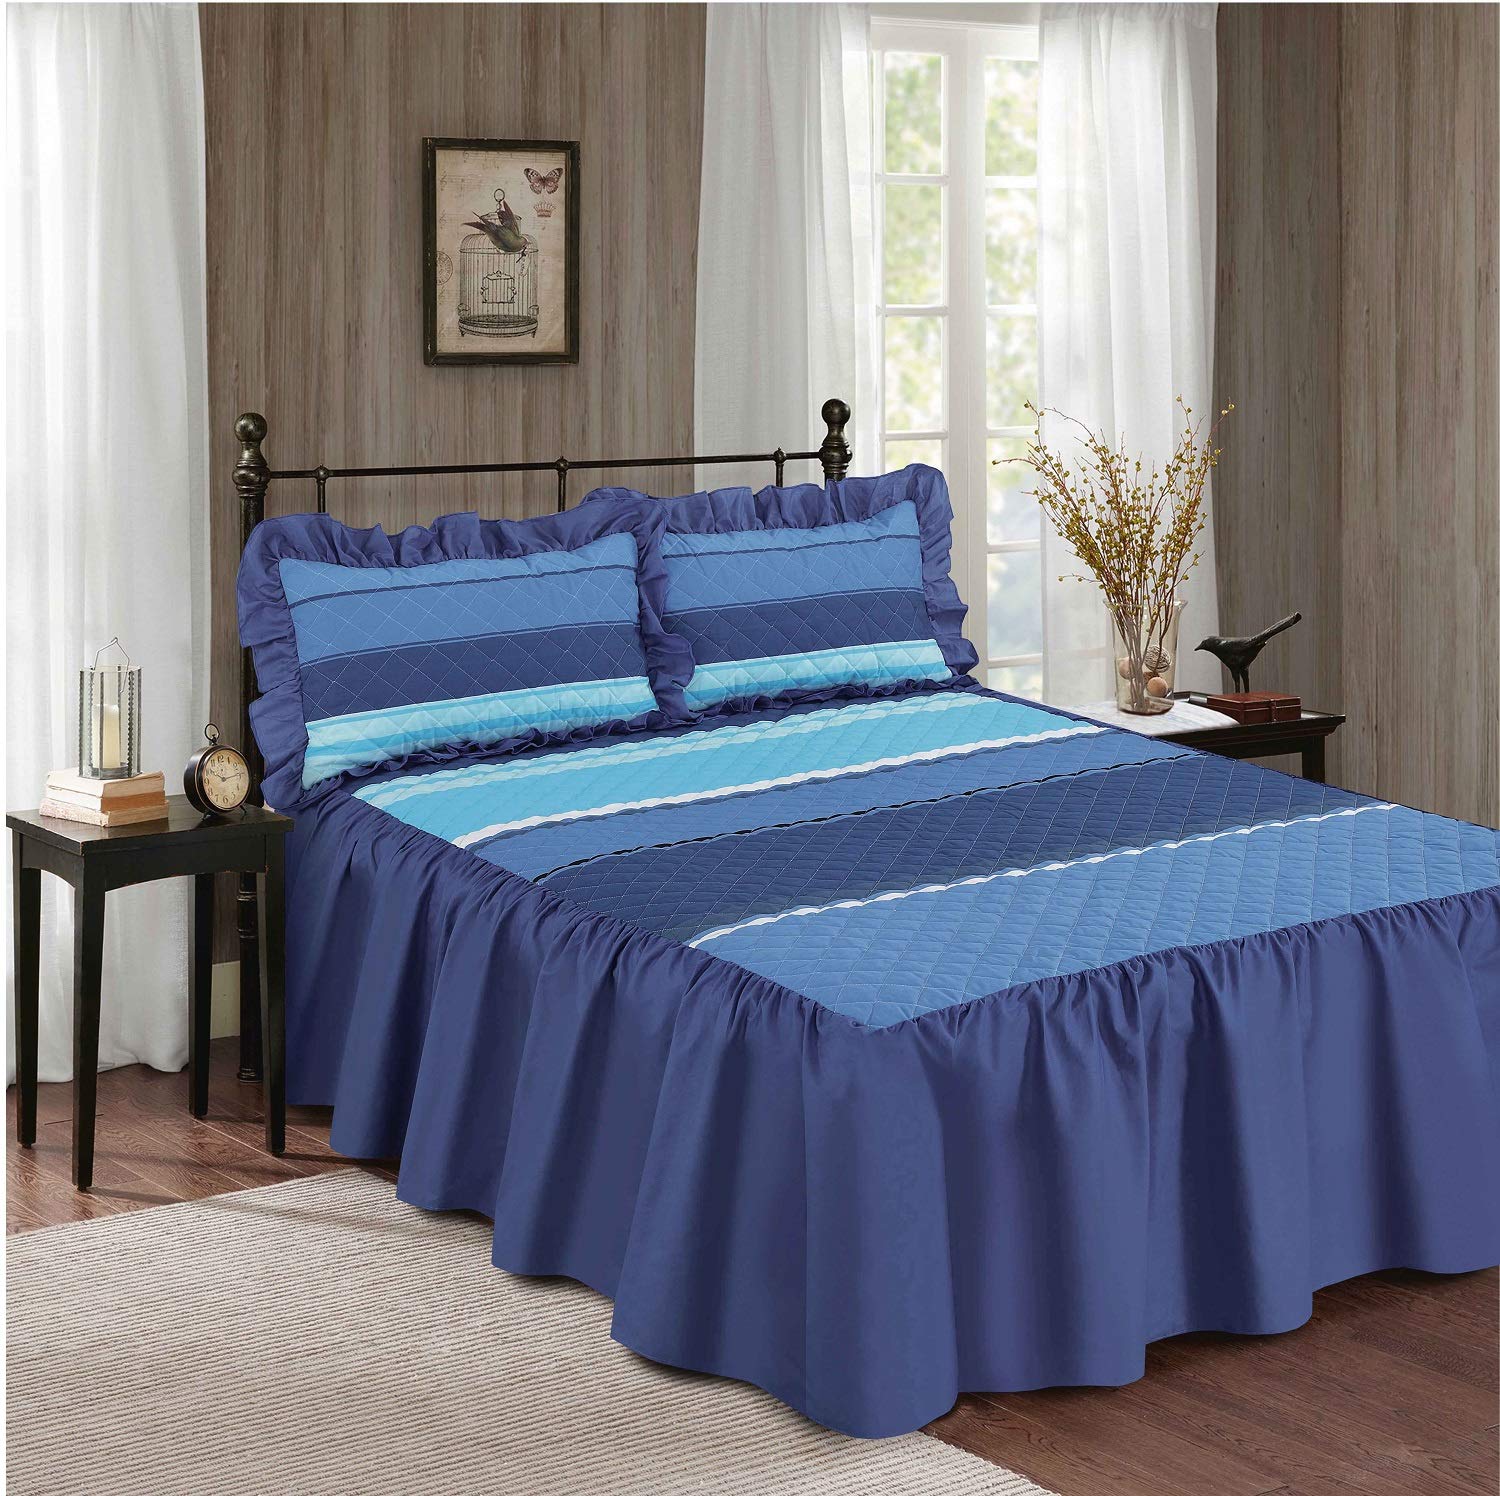 QUILT COVER SET WITH MATCHING PILLOW CASES SUPER QUALITY CARTER DUVET ALL UK SIZES Double, Blue 